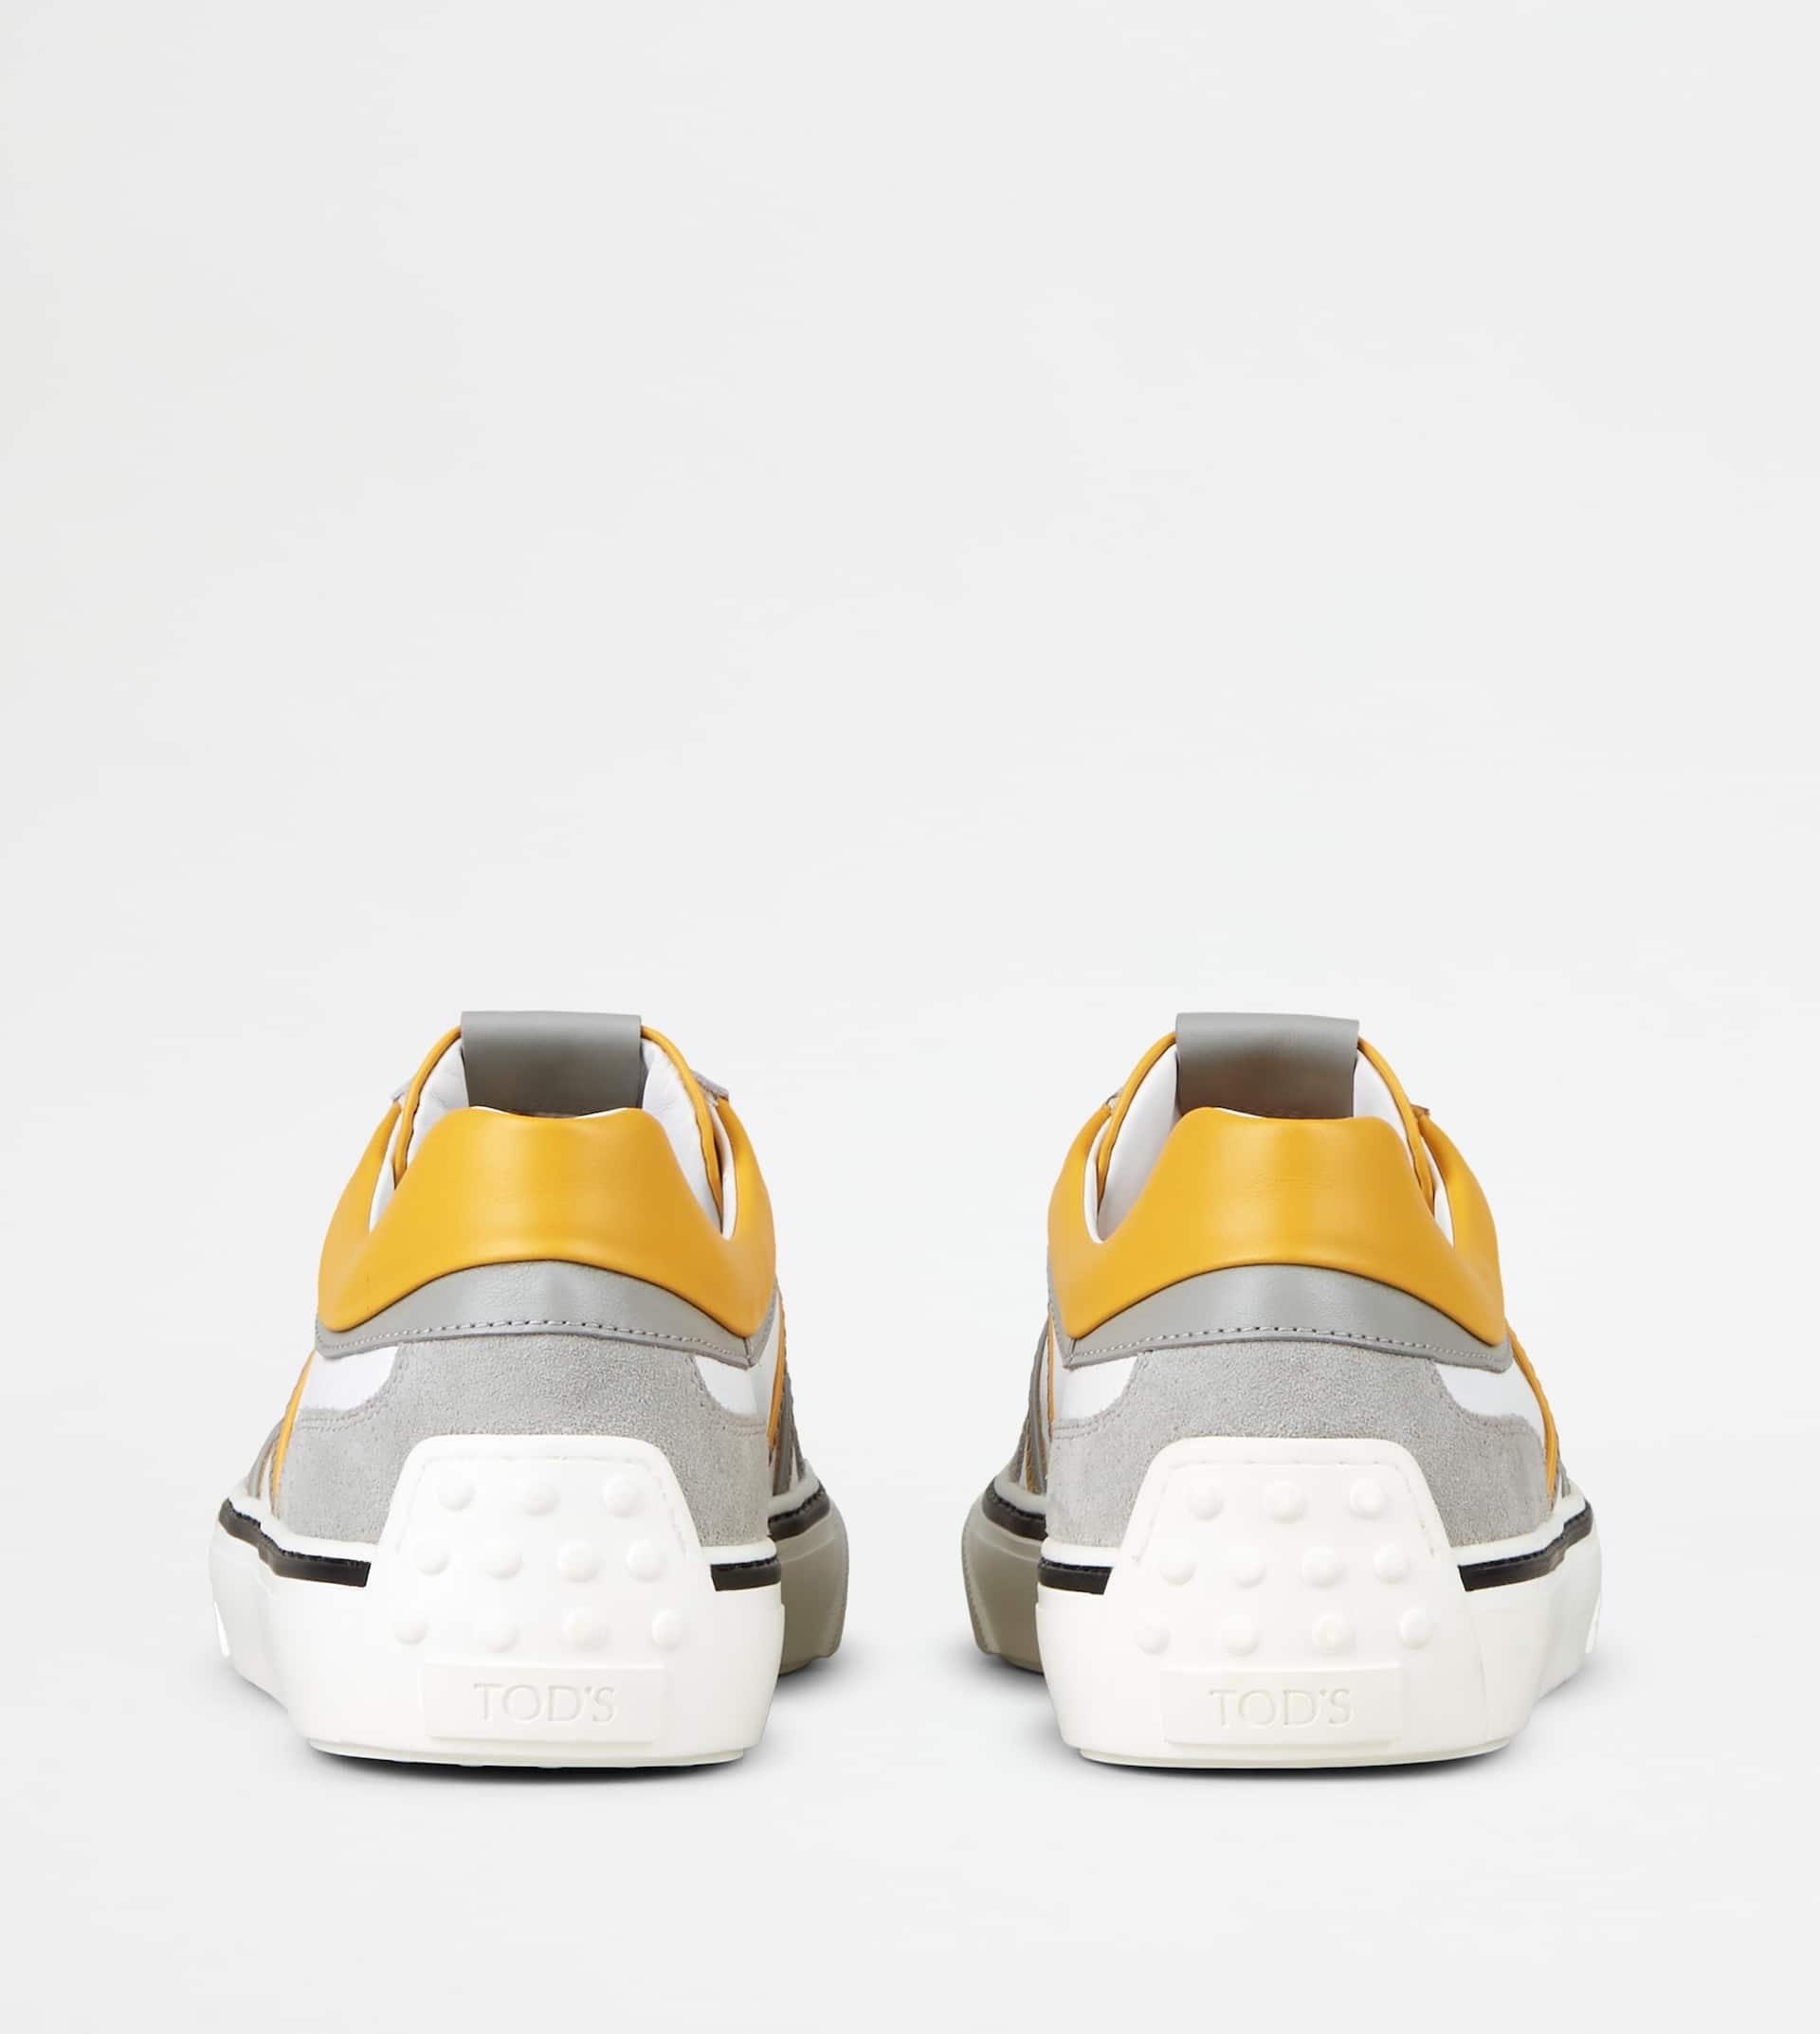 SNEAKERS IN LEATHER - GREY, WHITE, YELLOW - 3